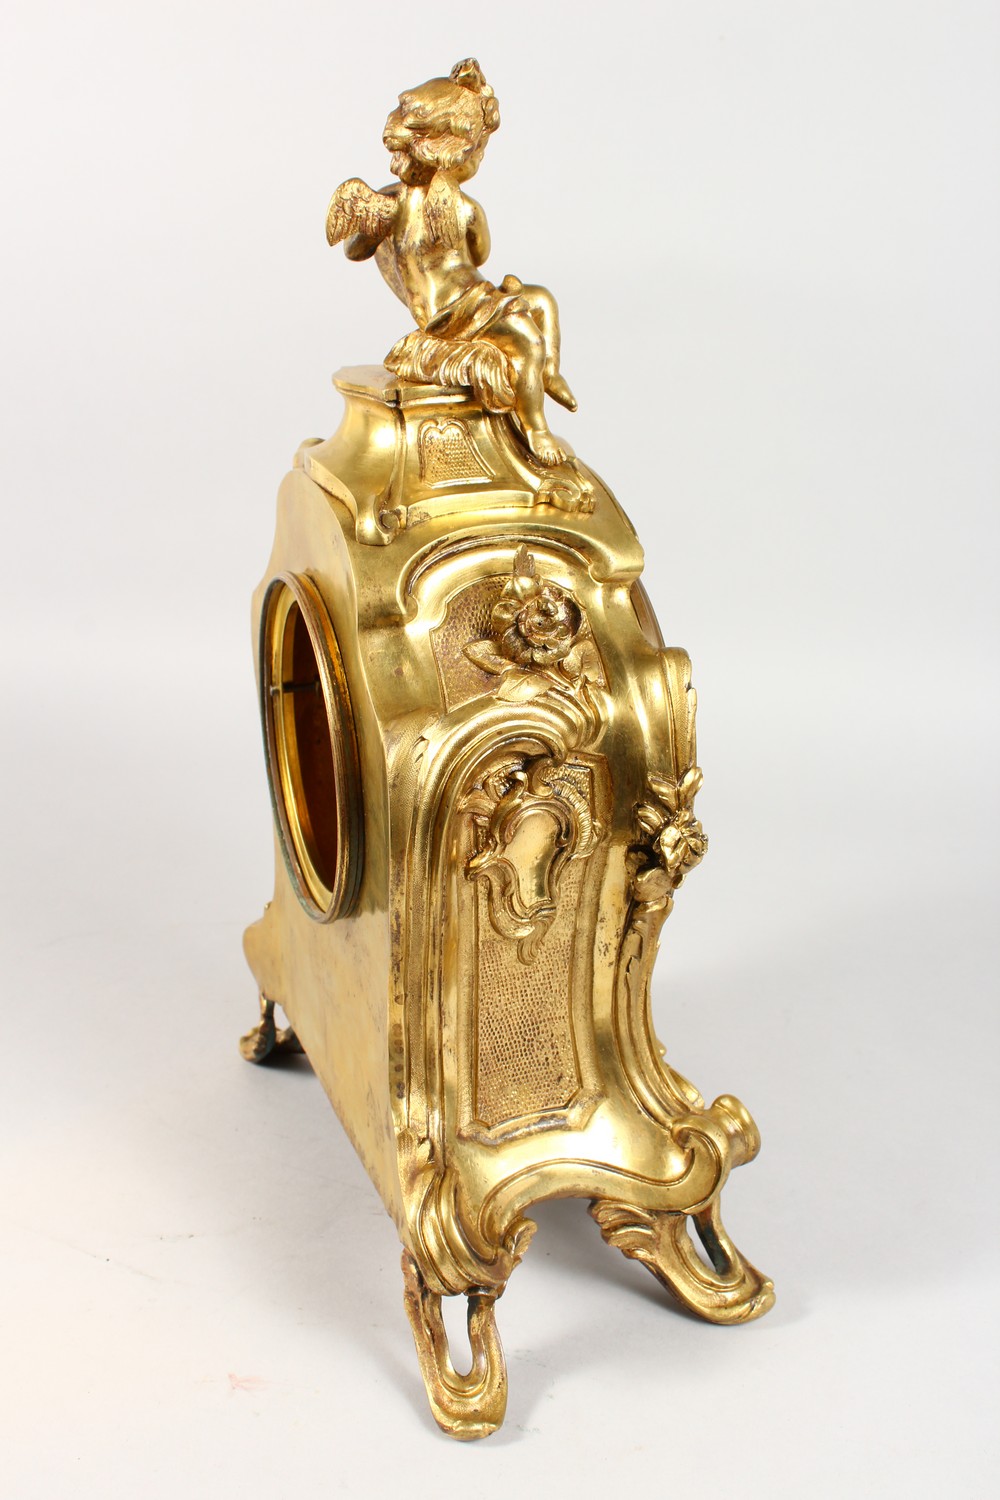 A GOOD LOUIS XVI HEAVY ORMOLU CLOCK by LEROUX, LE MANS, the case with cupids, scrolls, acanthus - Image 5 of 9